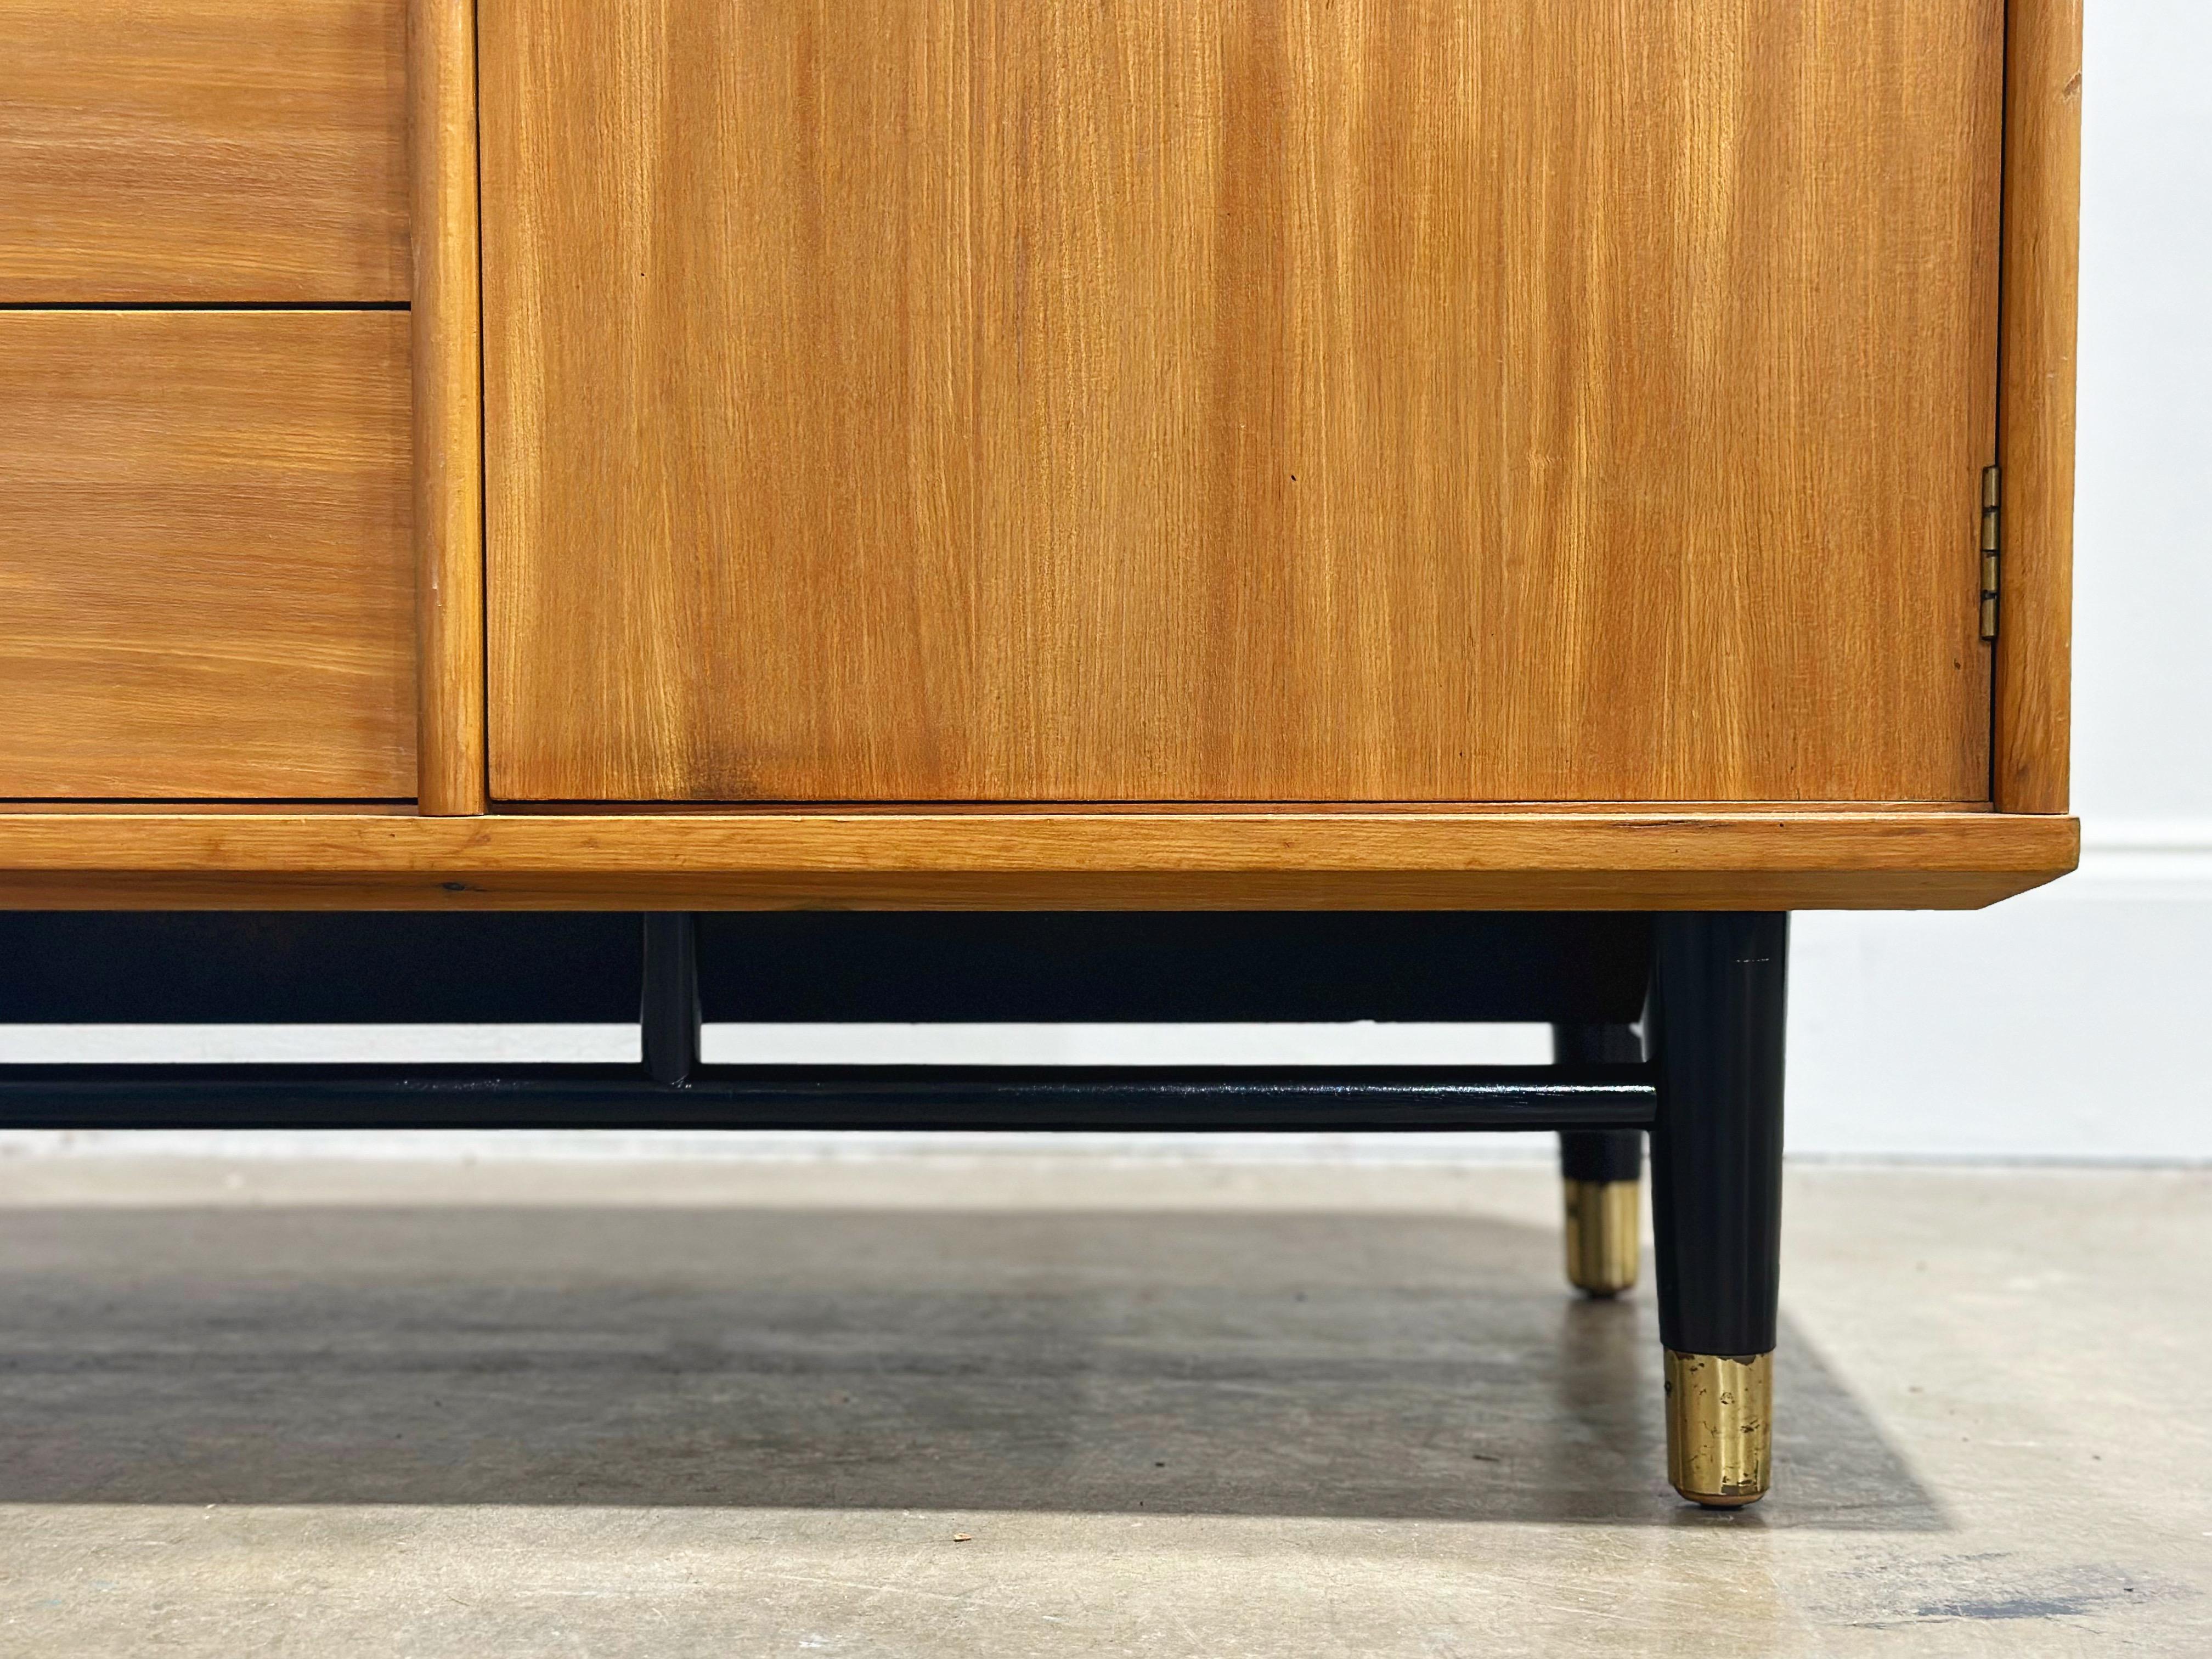 Stellar midcentury modern credenza by Milo Baughman for Drexel, Today's Living line. Solid elm construction with a black lacquered base, solid brass 